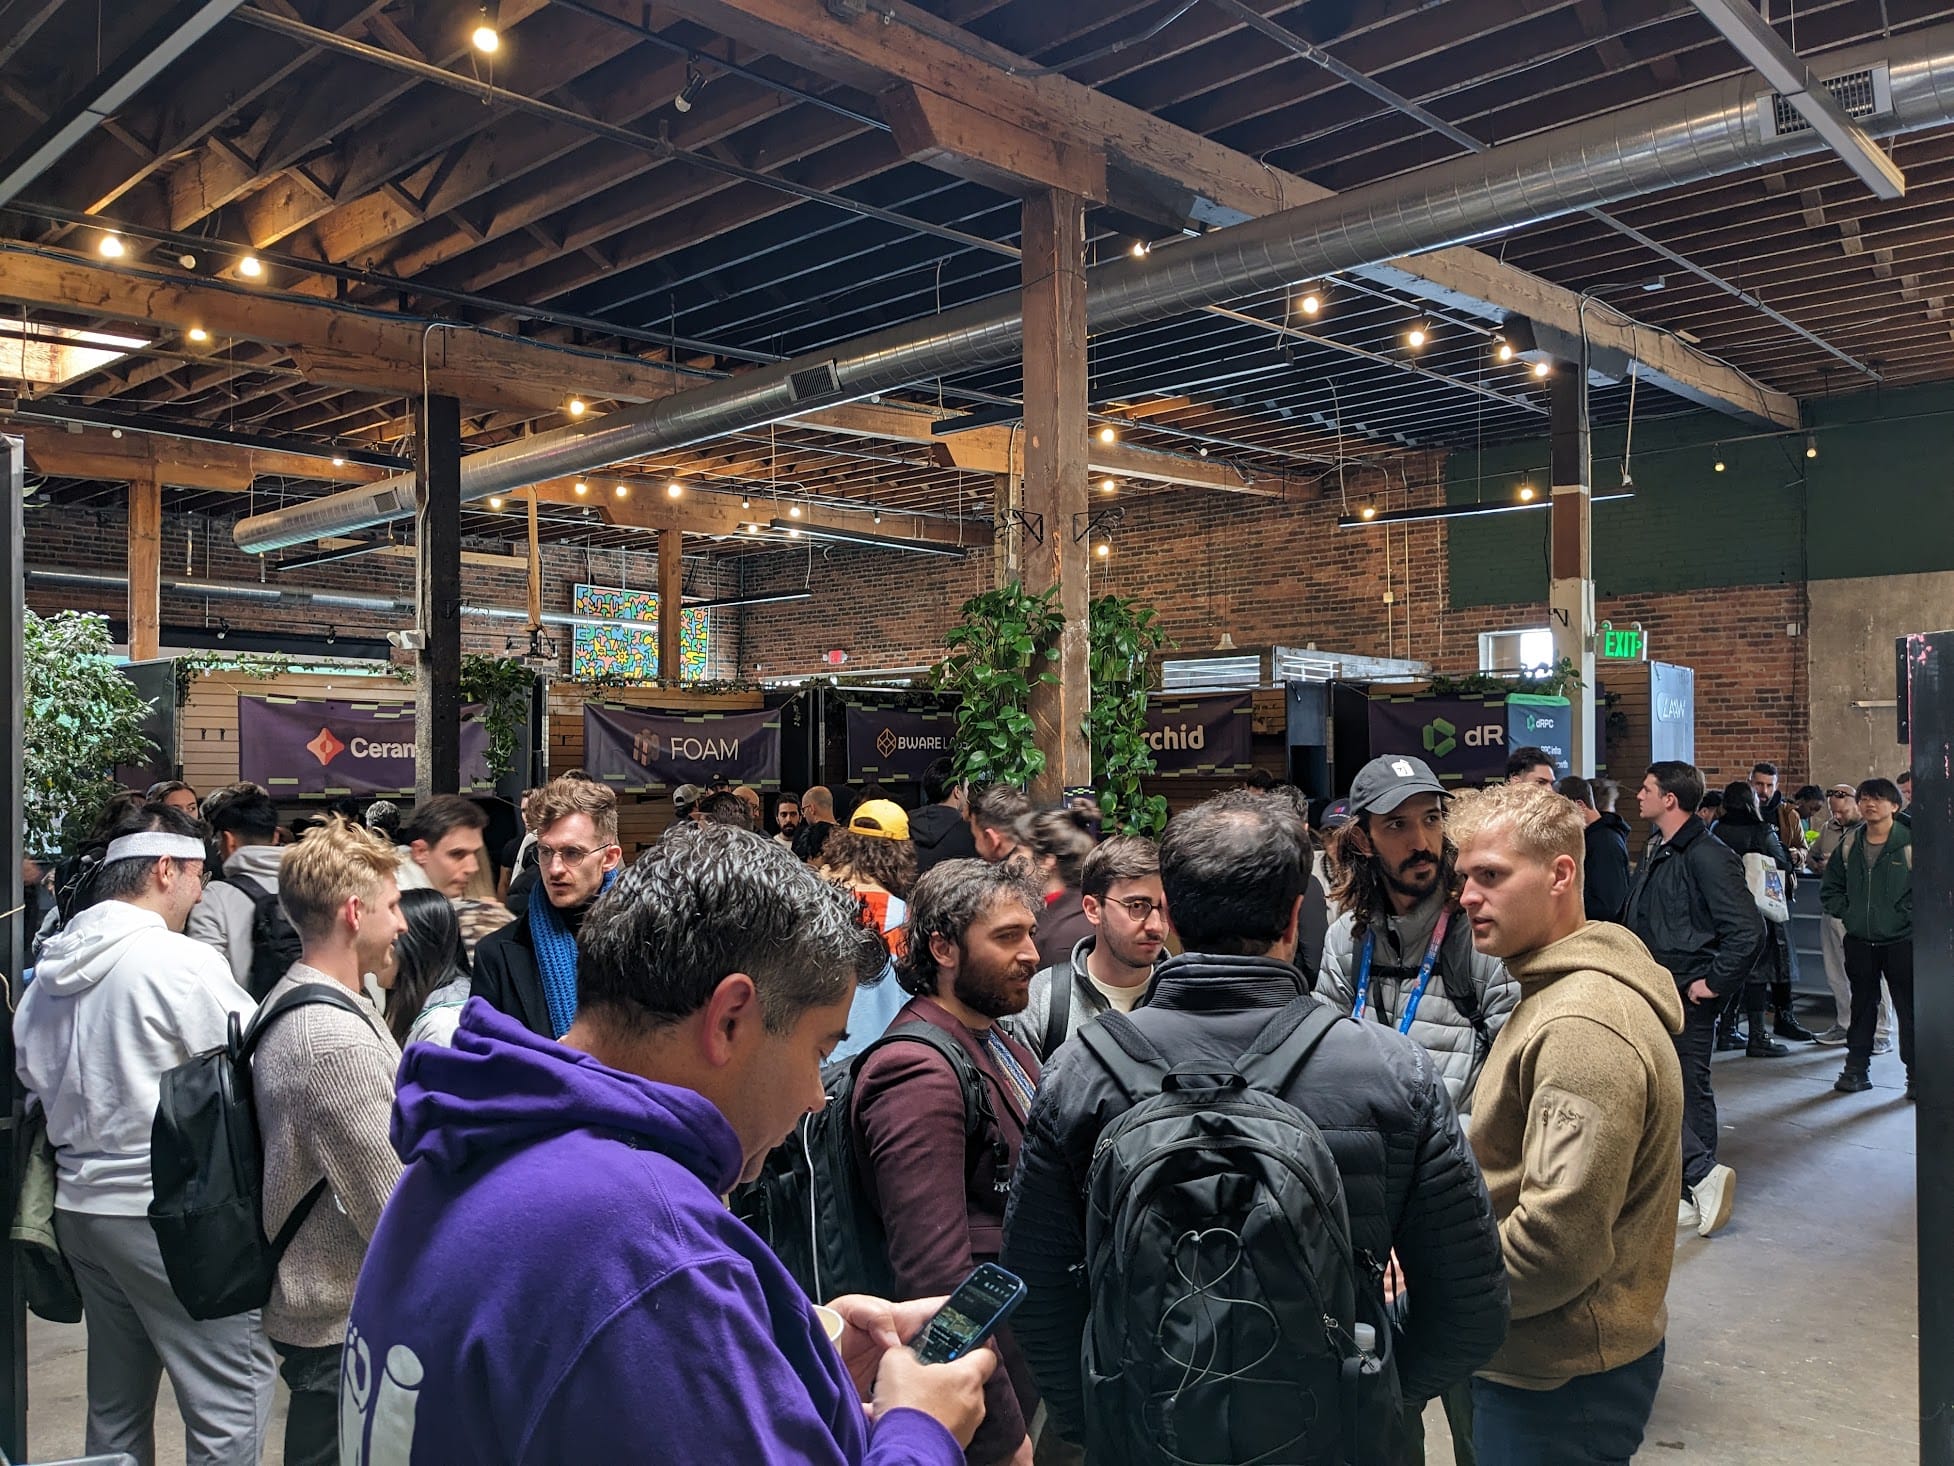 EthDenver crowd in a wood beamed venue